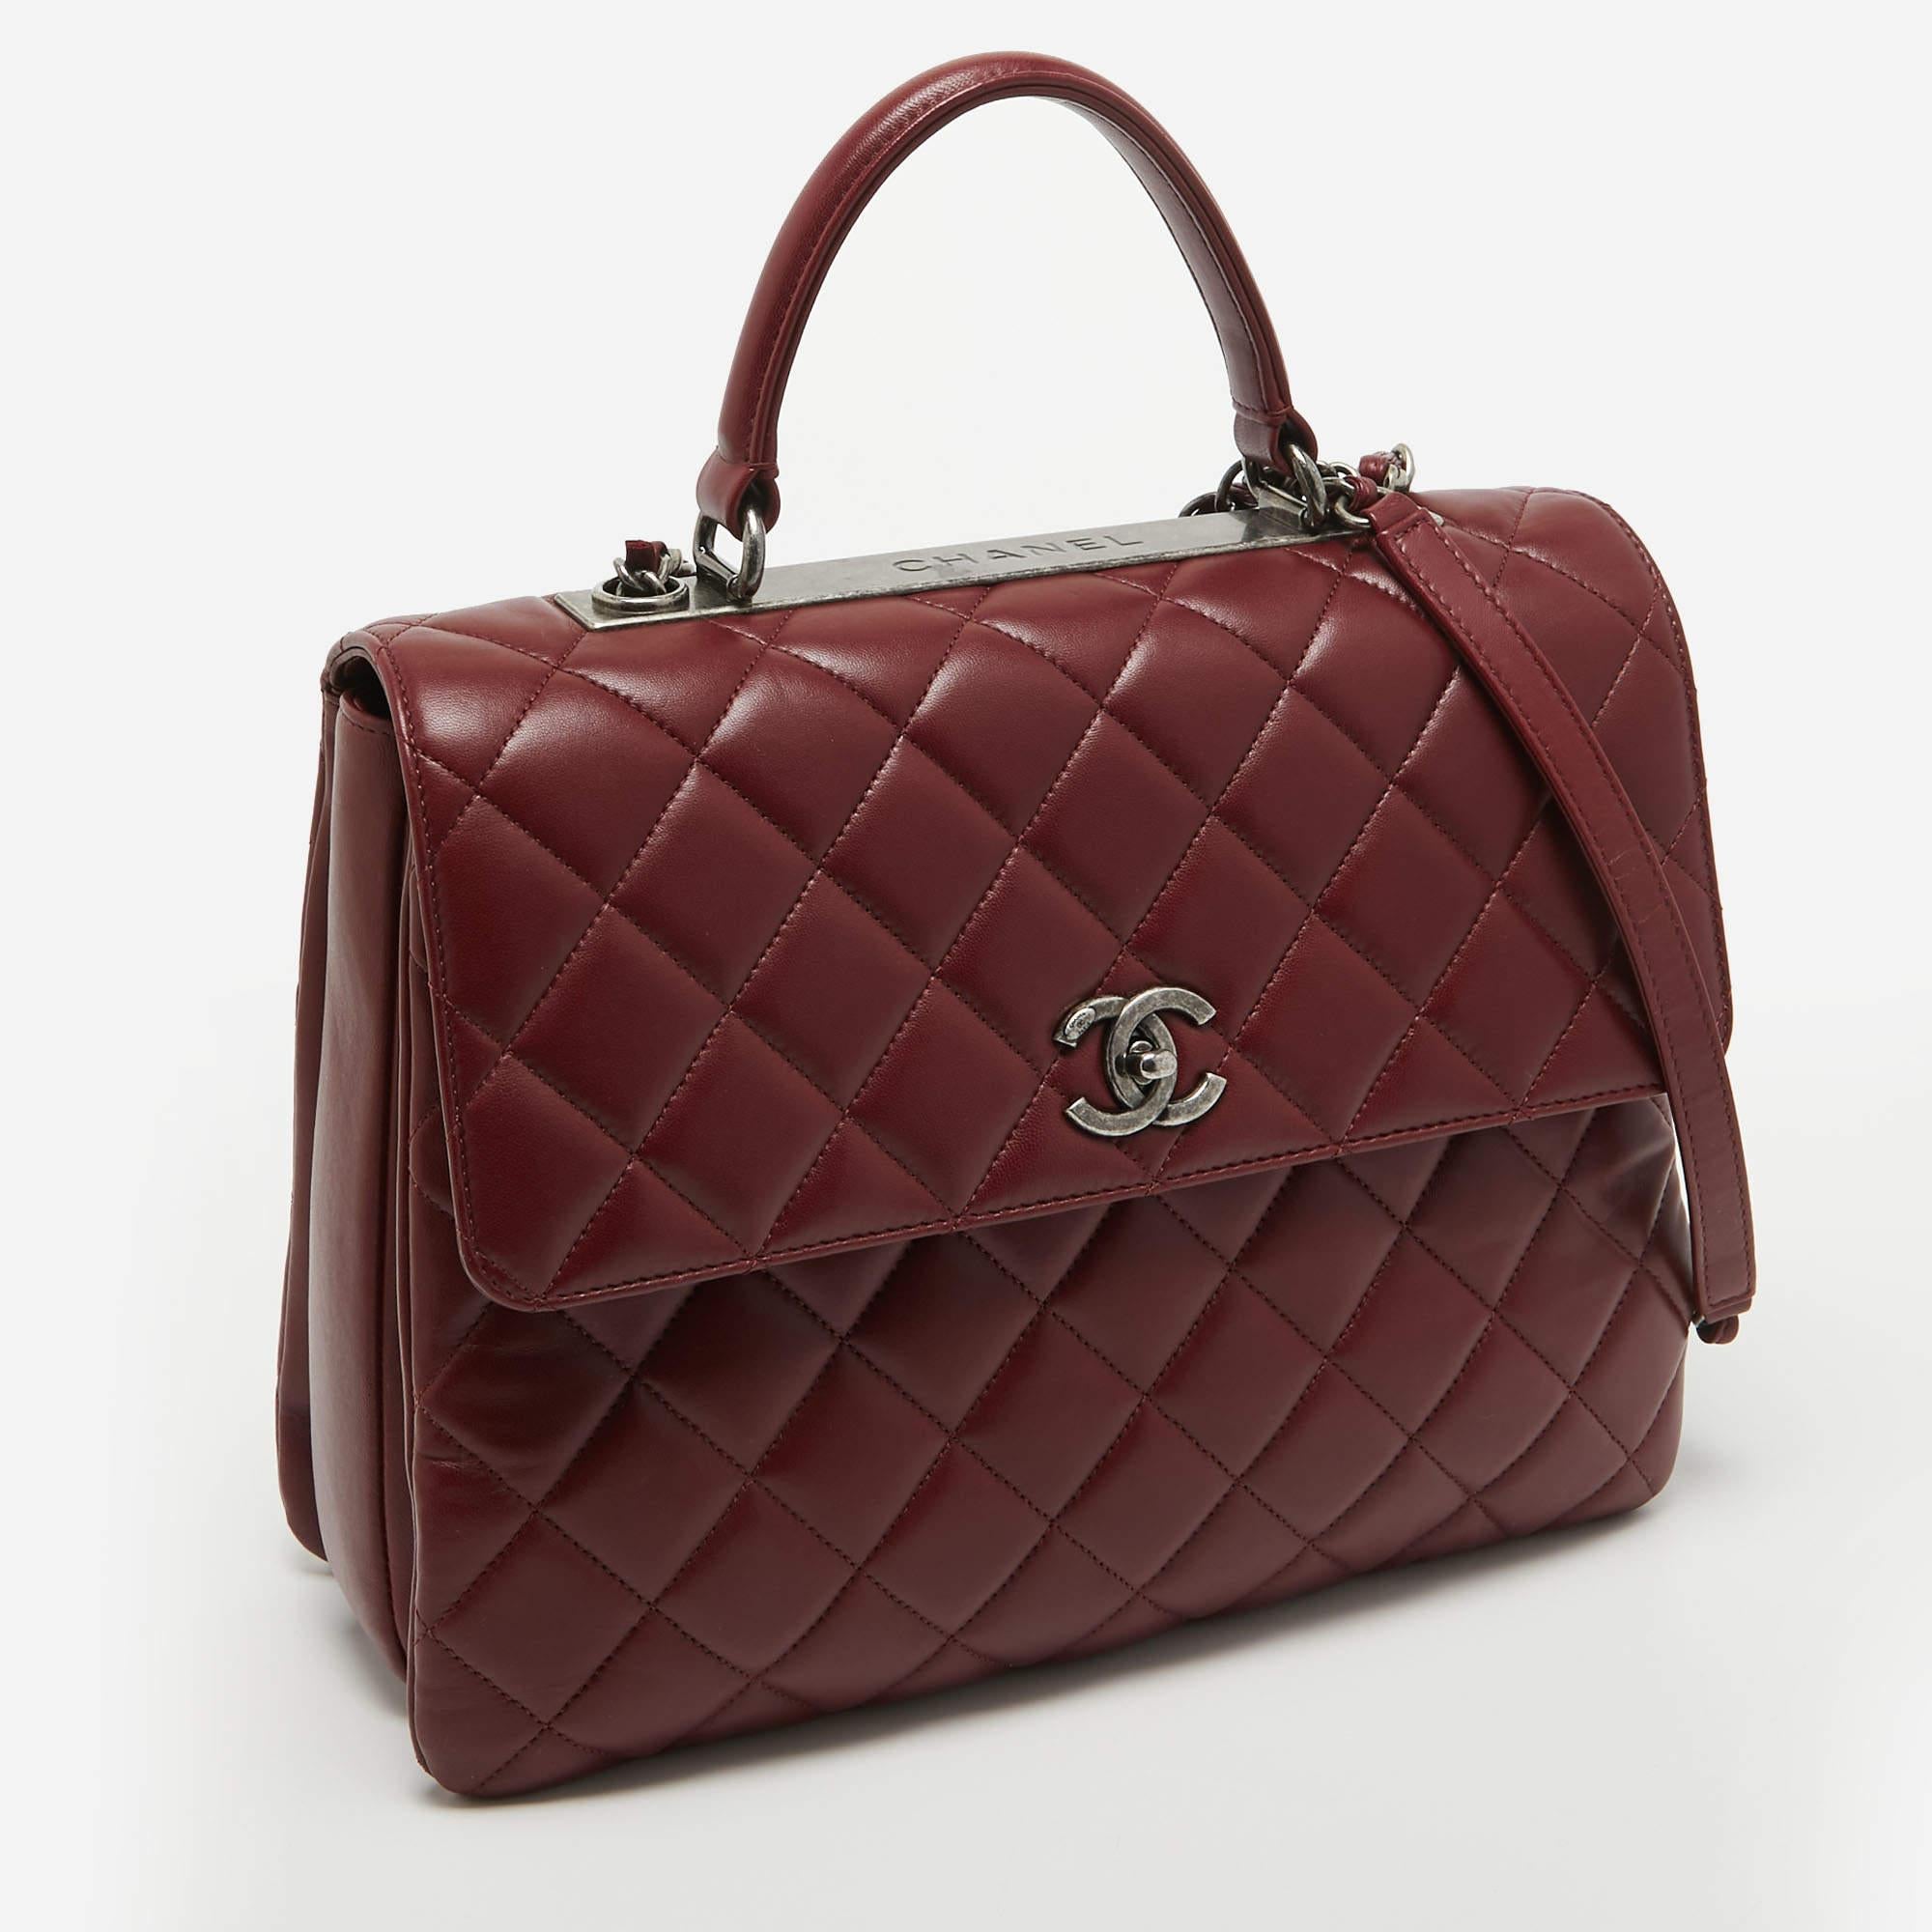 Chanel Dark Red Quilted Leather Large Trendy CC Top Handle Bag In Good Condition For Sale In Dubai, Al Qouz 2